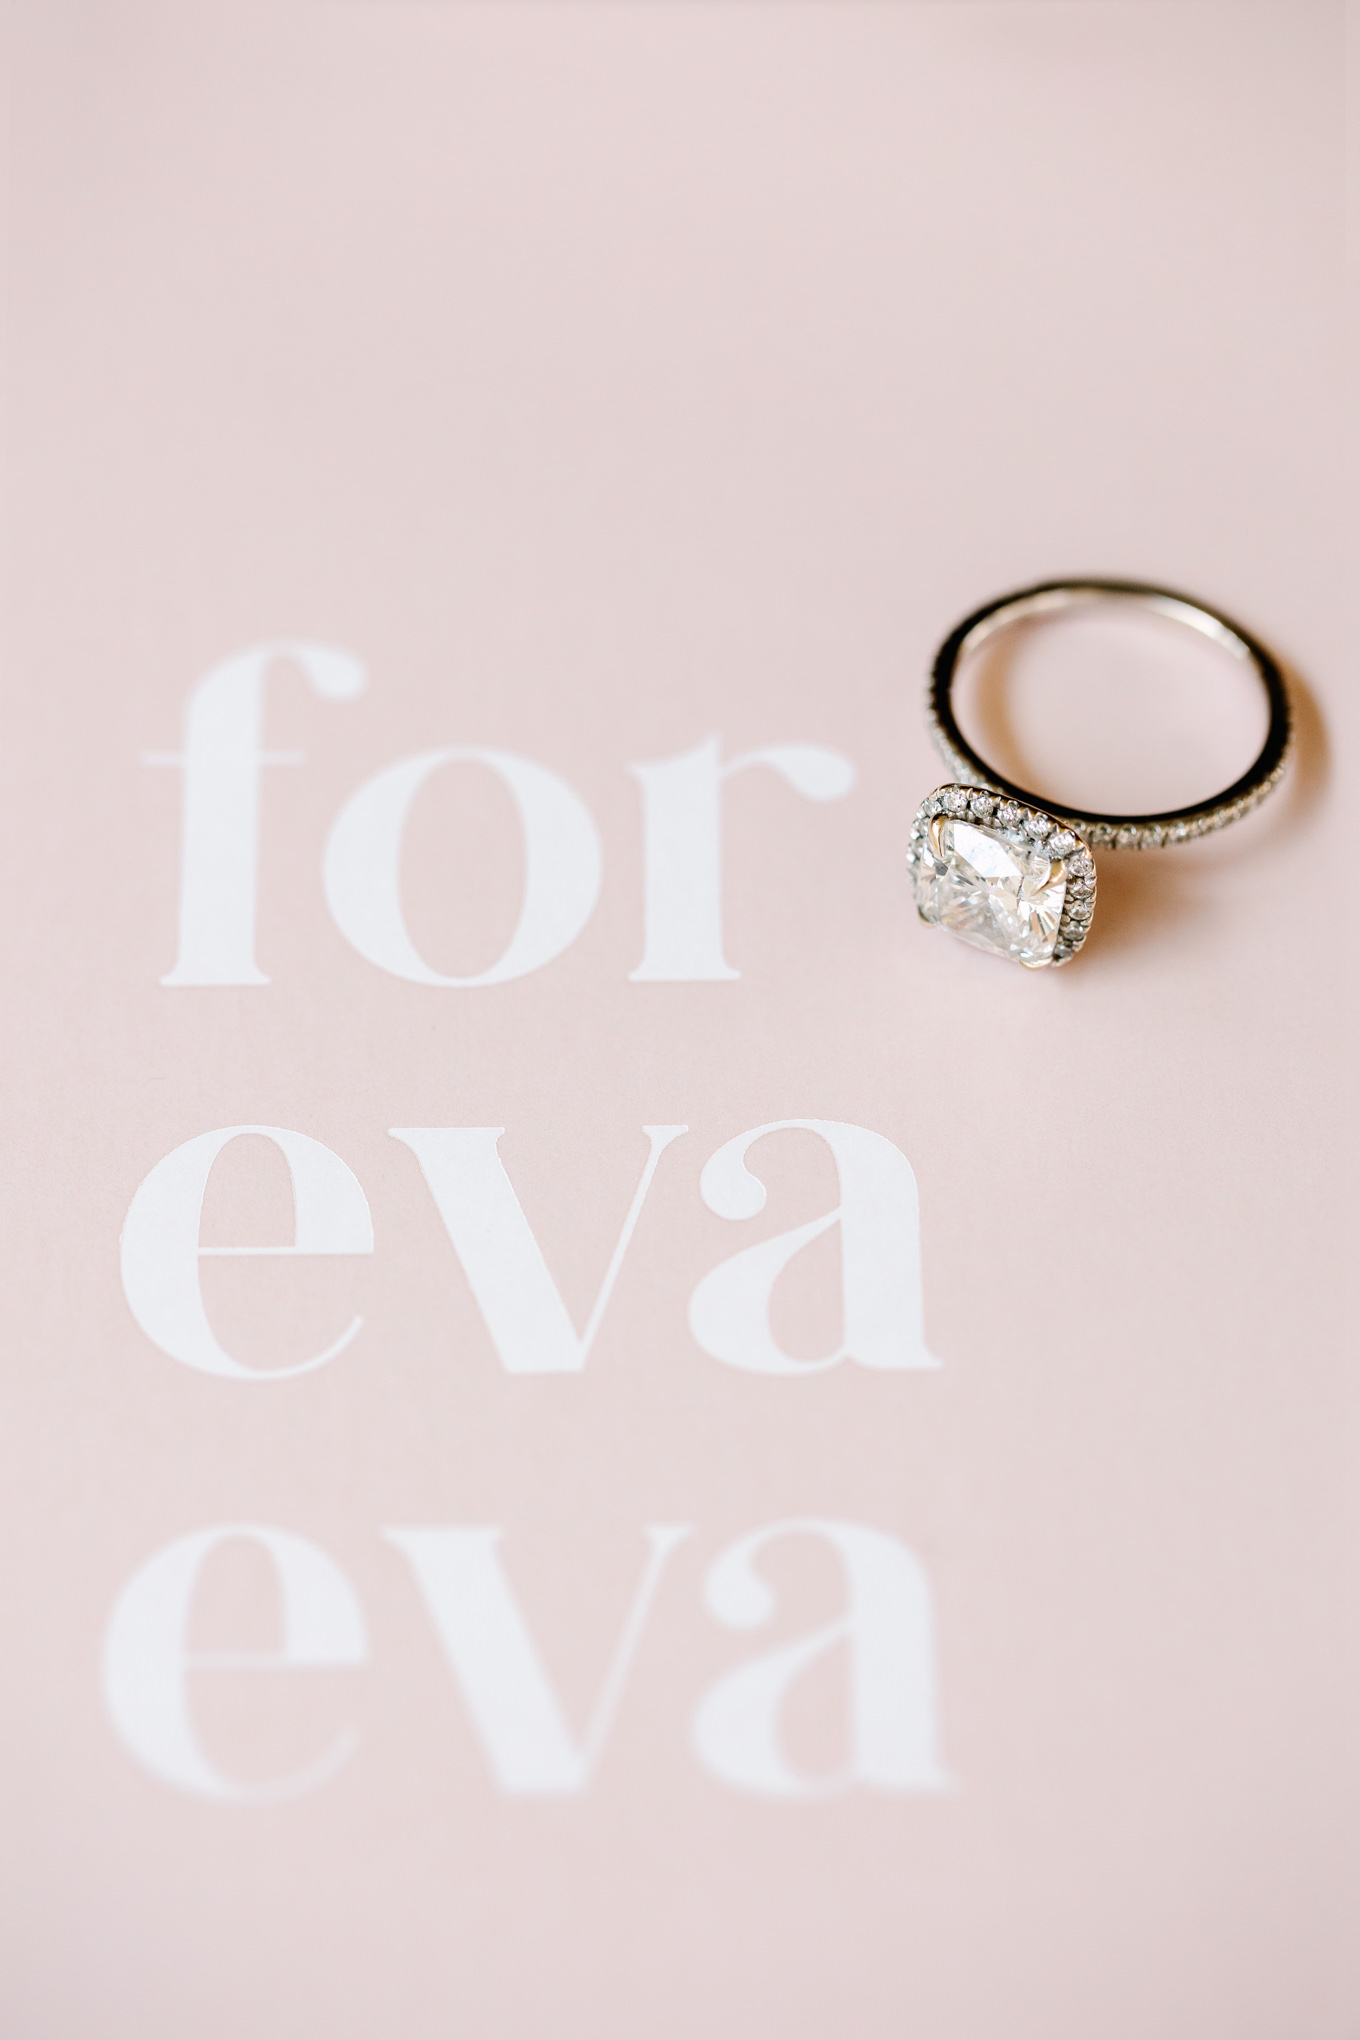 For eva eva wedding invitation with engagement ring | Pink and orange Lautner Compound wedding | Colorful Palm Springs wedding photography | #palmspringsphotographer #palmspringswedding #lautnercompound #southerncaliforniawedding  Source: Mary Costa Photography | Los Angeles